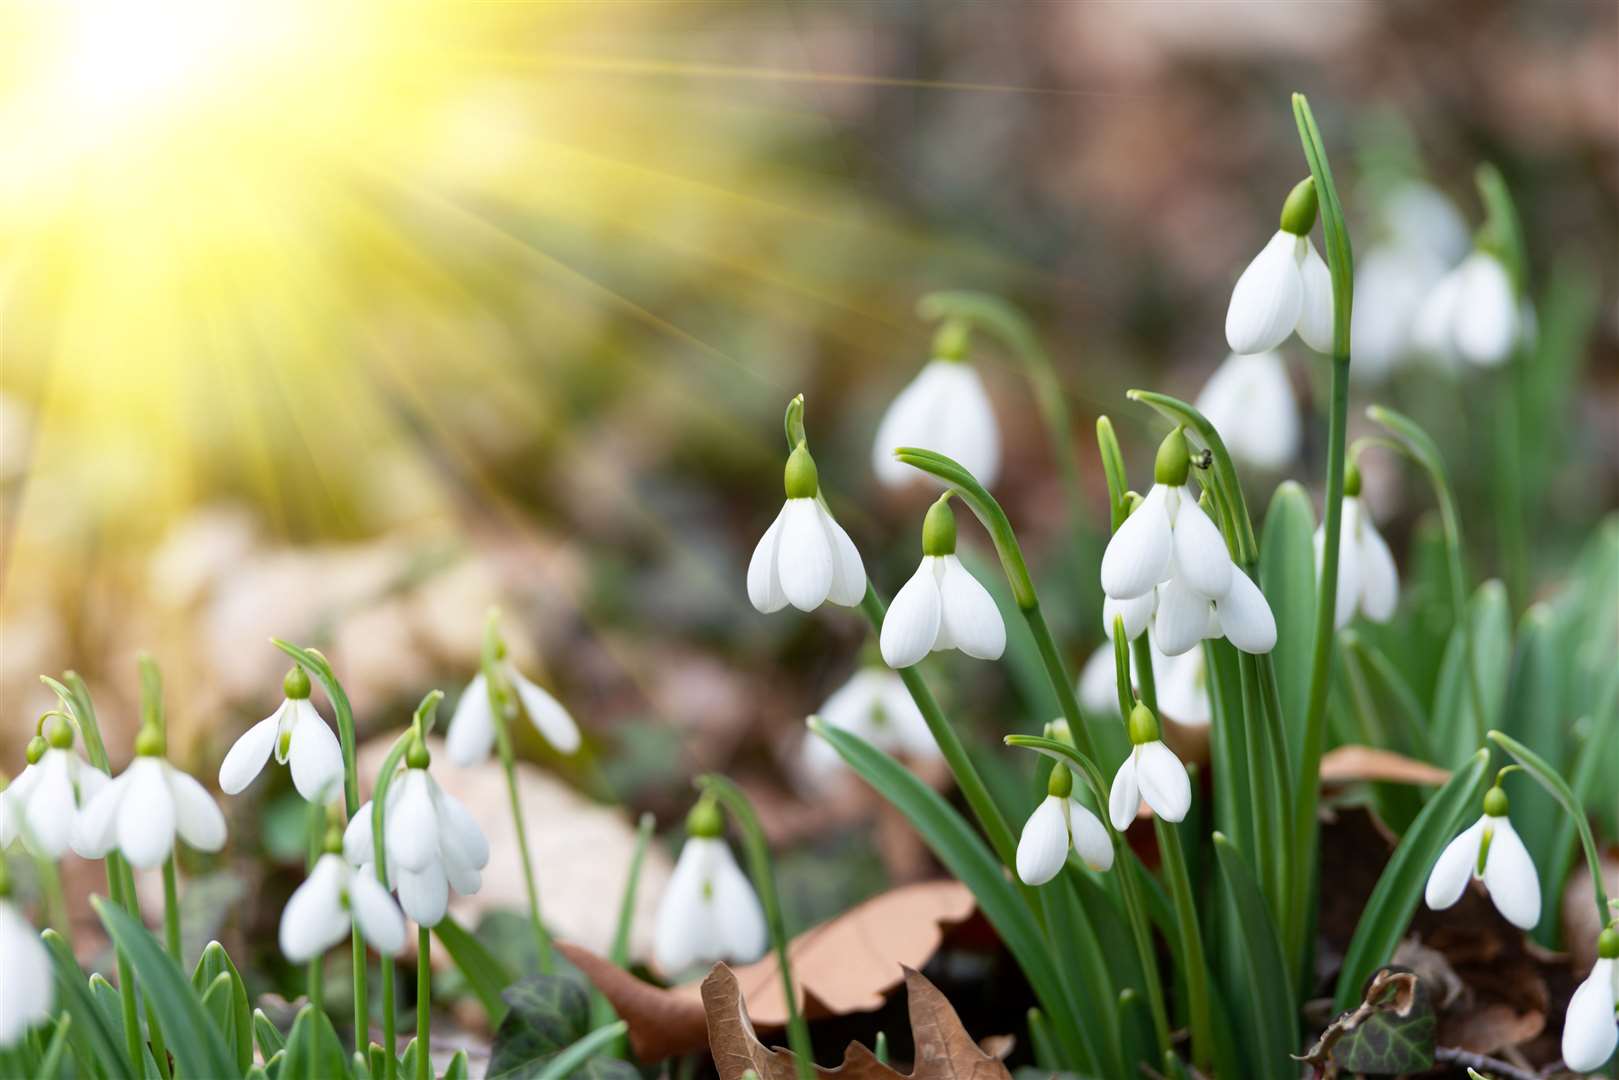 Snowdrops will be springing up Picture: Contributed